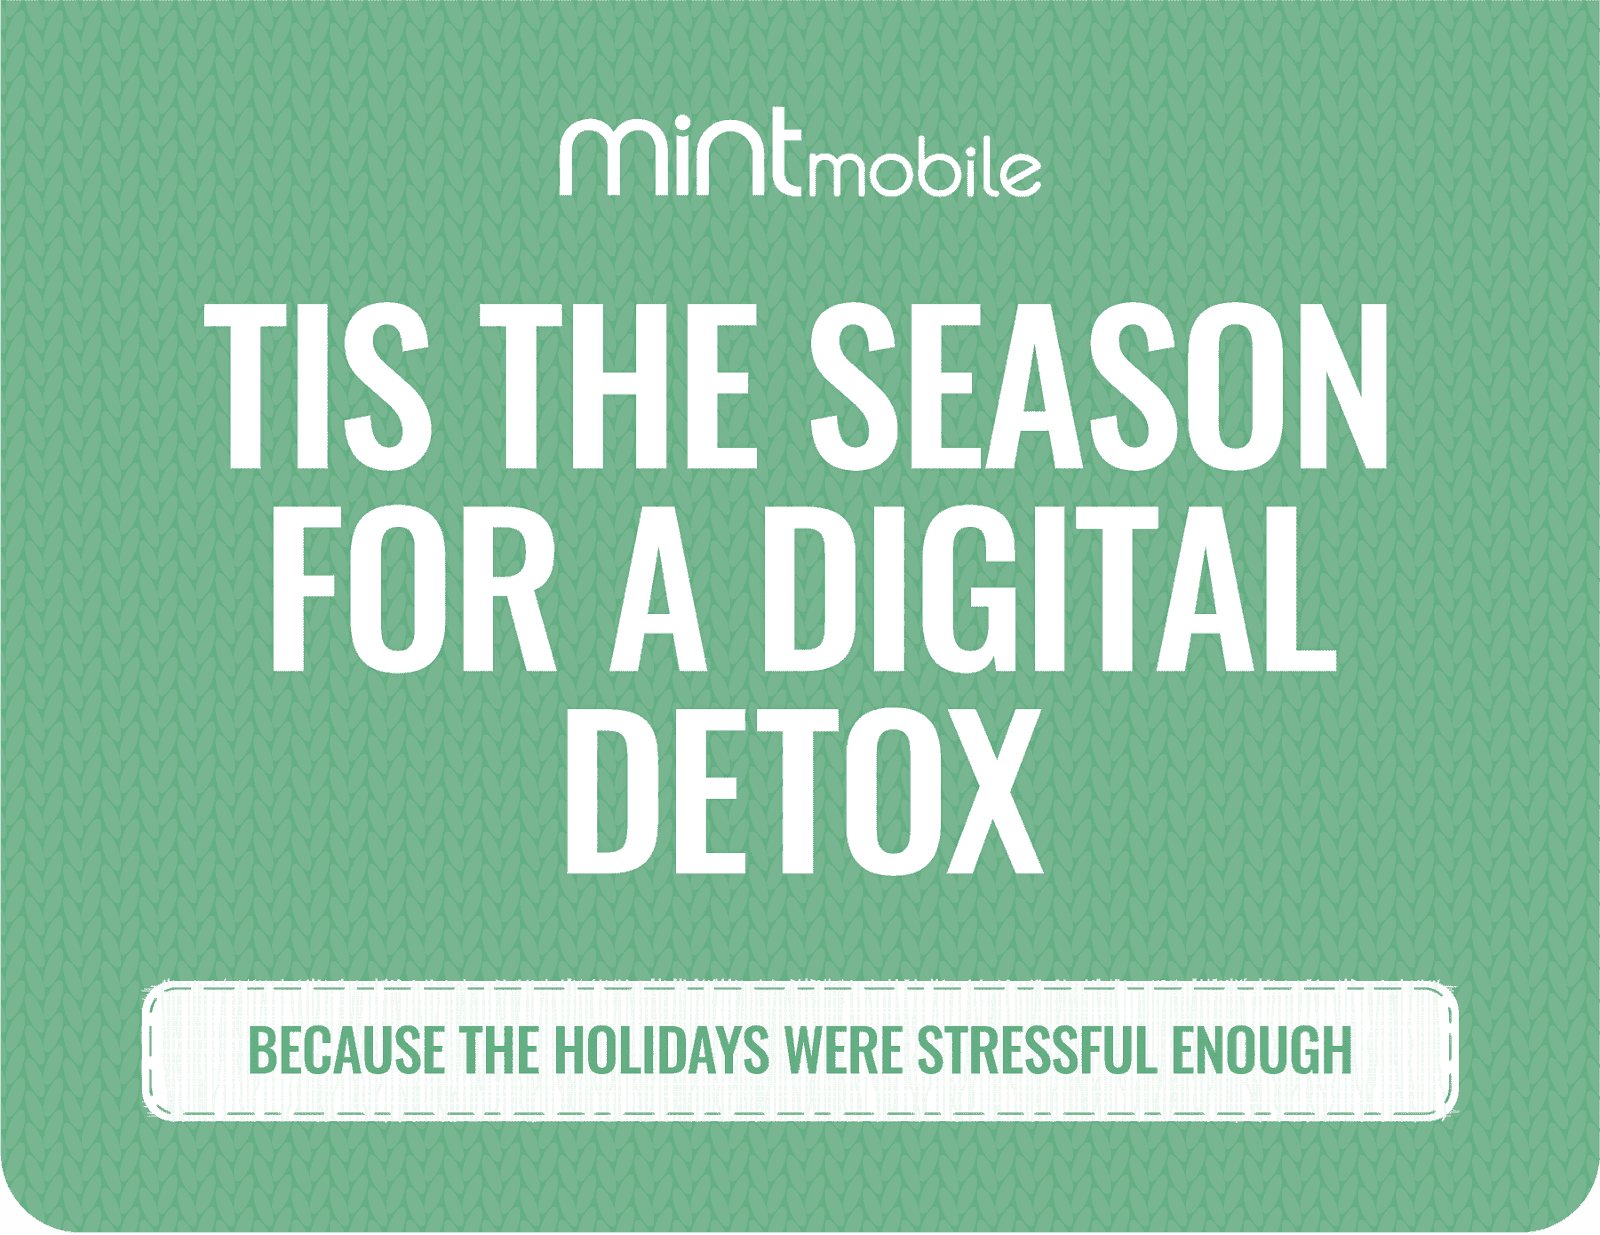 Tis the season for a digital detox - because the holidays were stressful enough